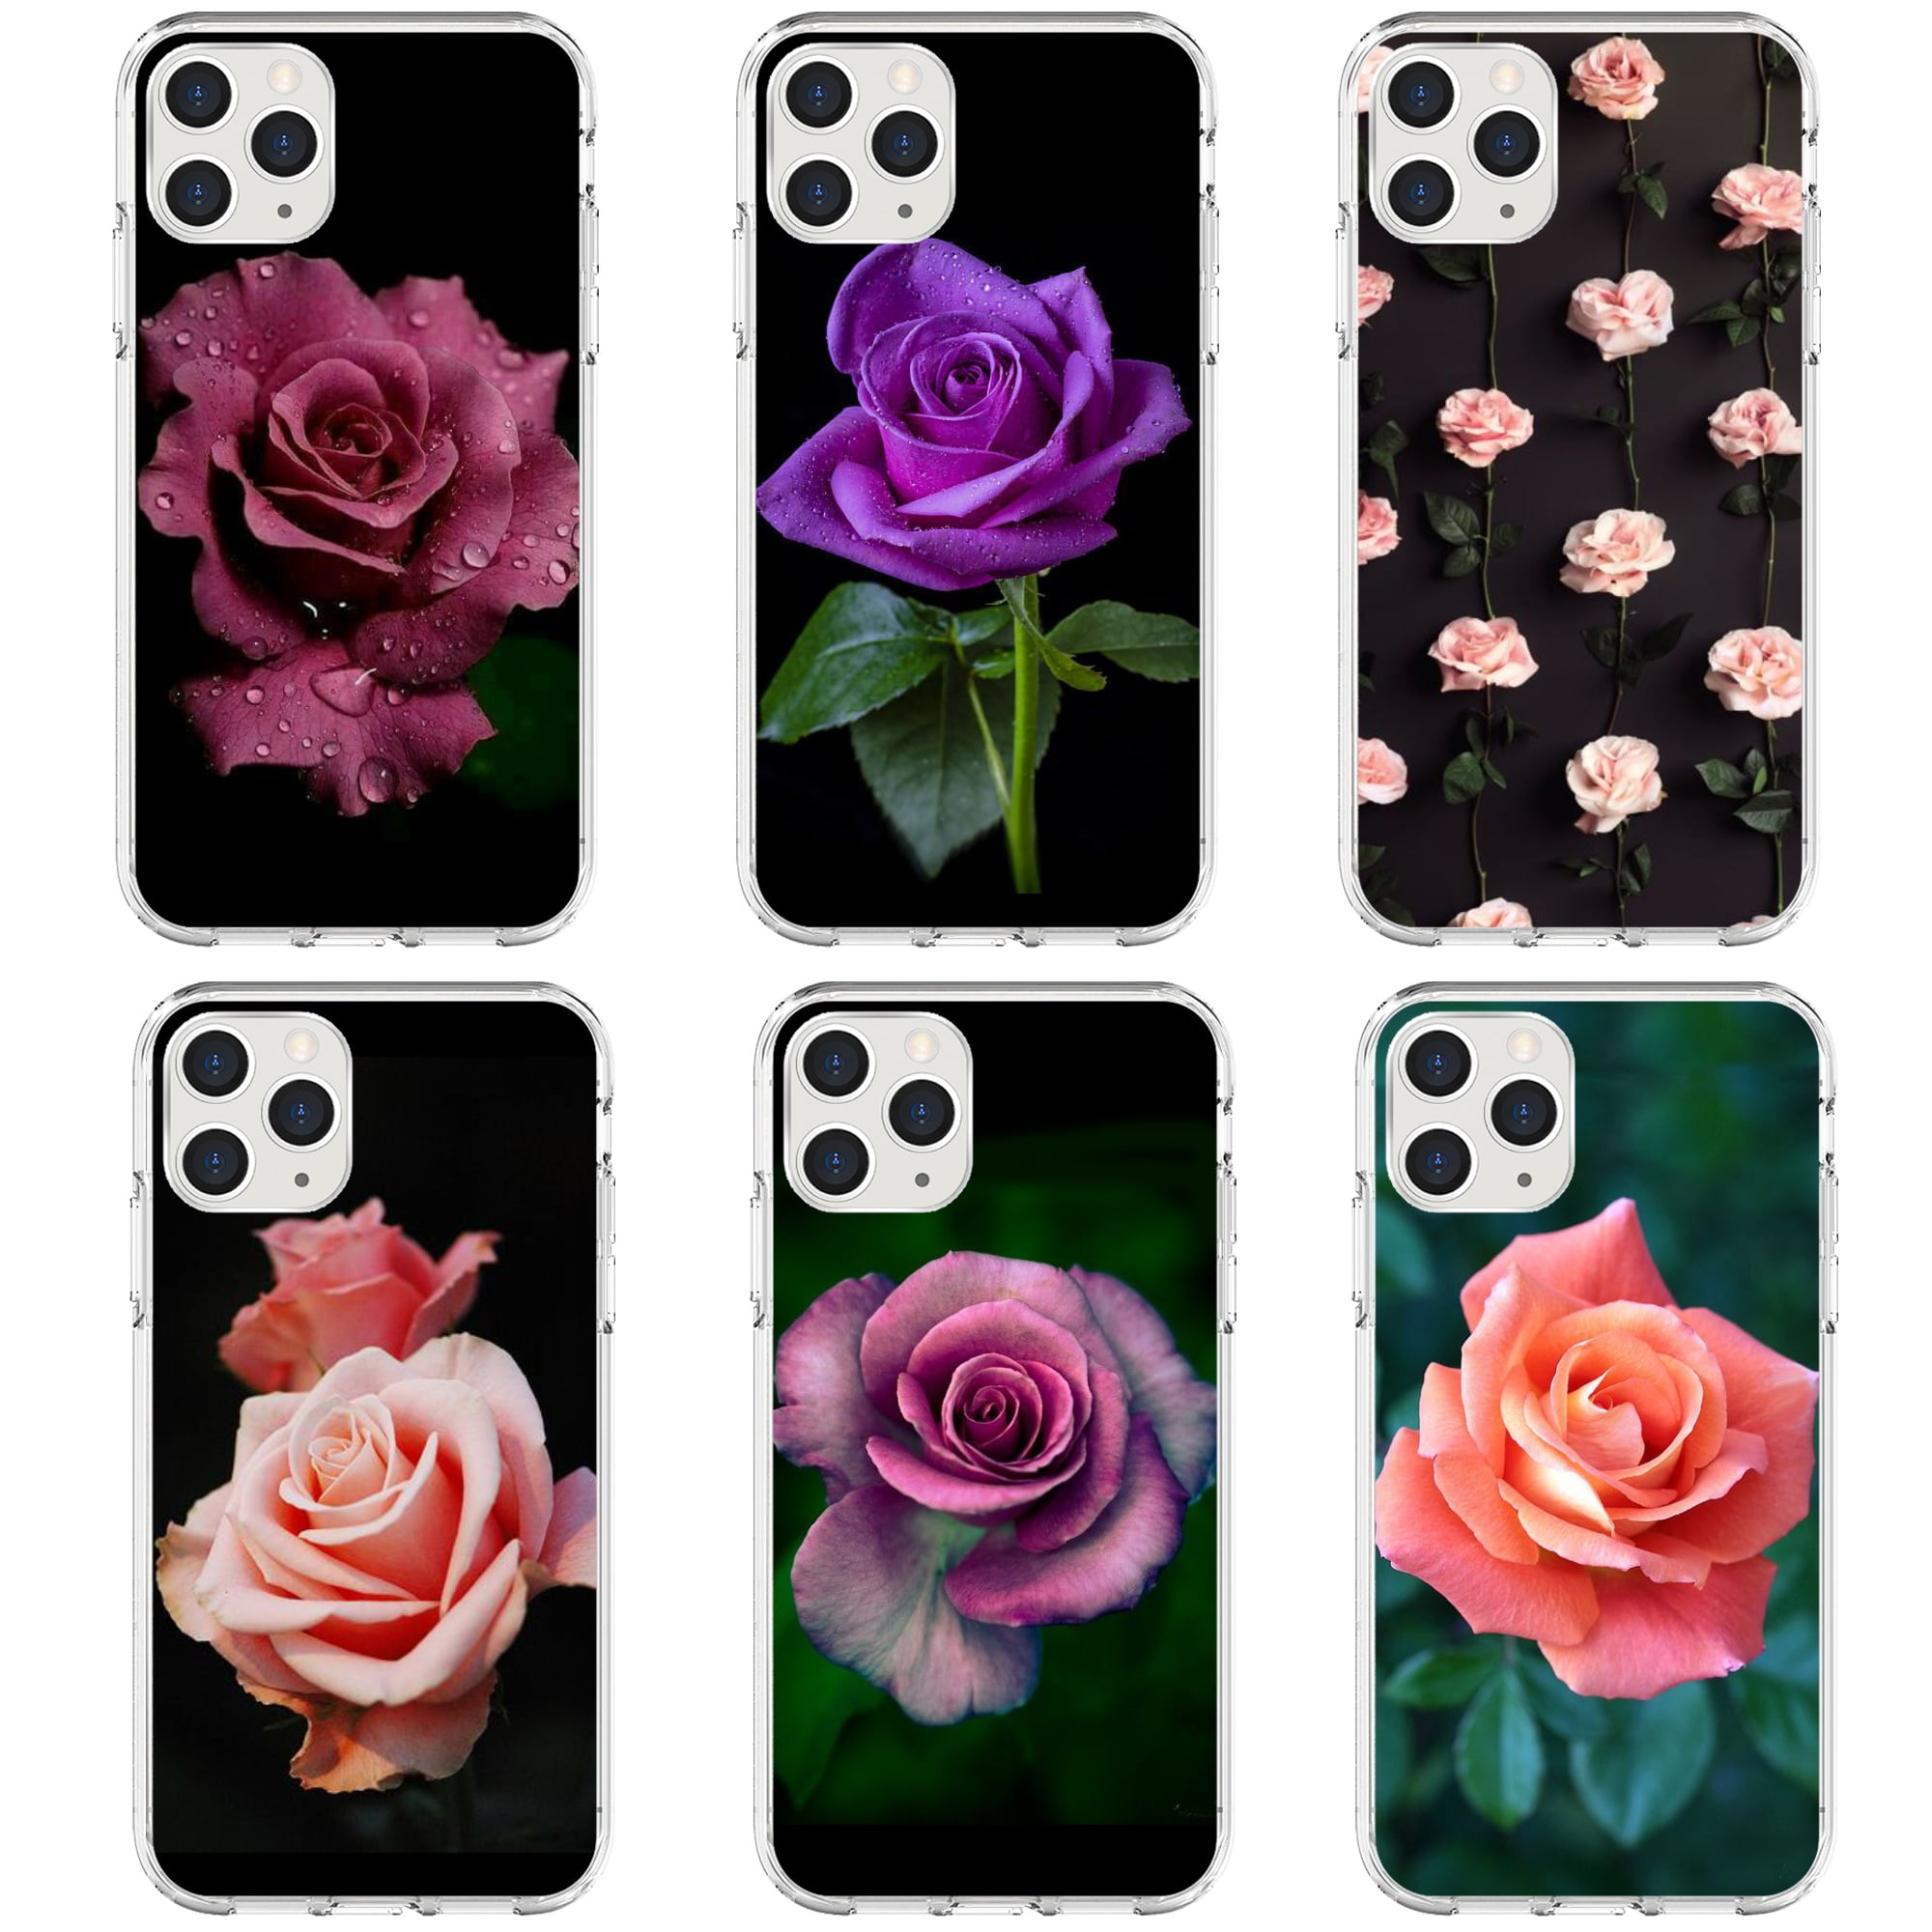 For iPhone models 5 SE 6 6s 7 8 plus X XR Xs Max 11 12 Floral Flowers iPhone 12 pro max case cover